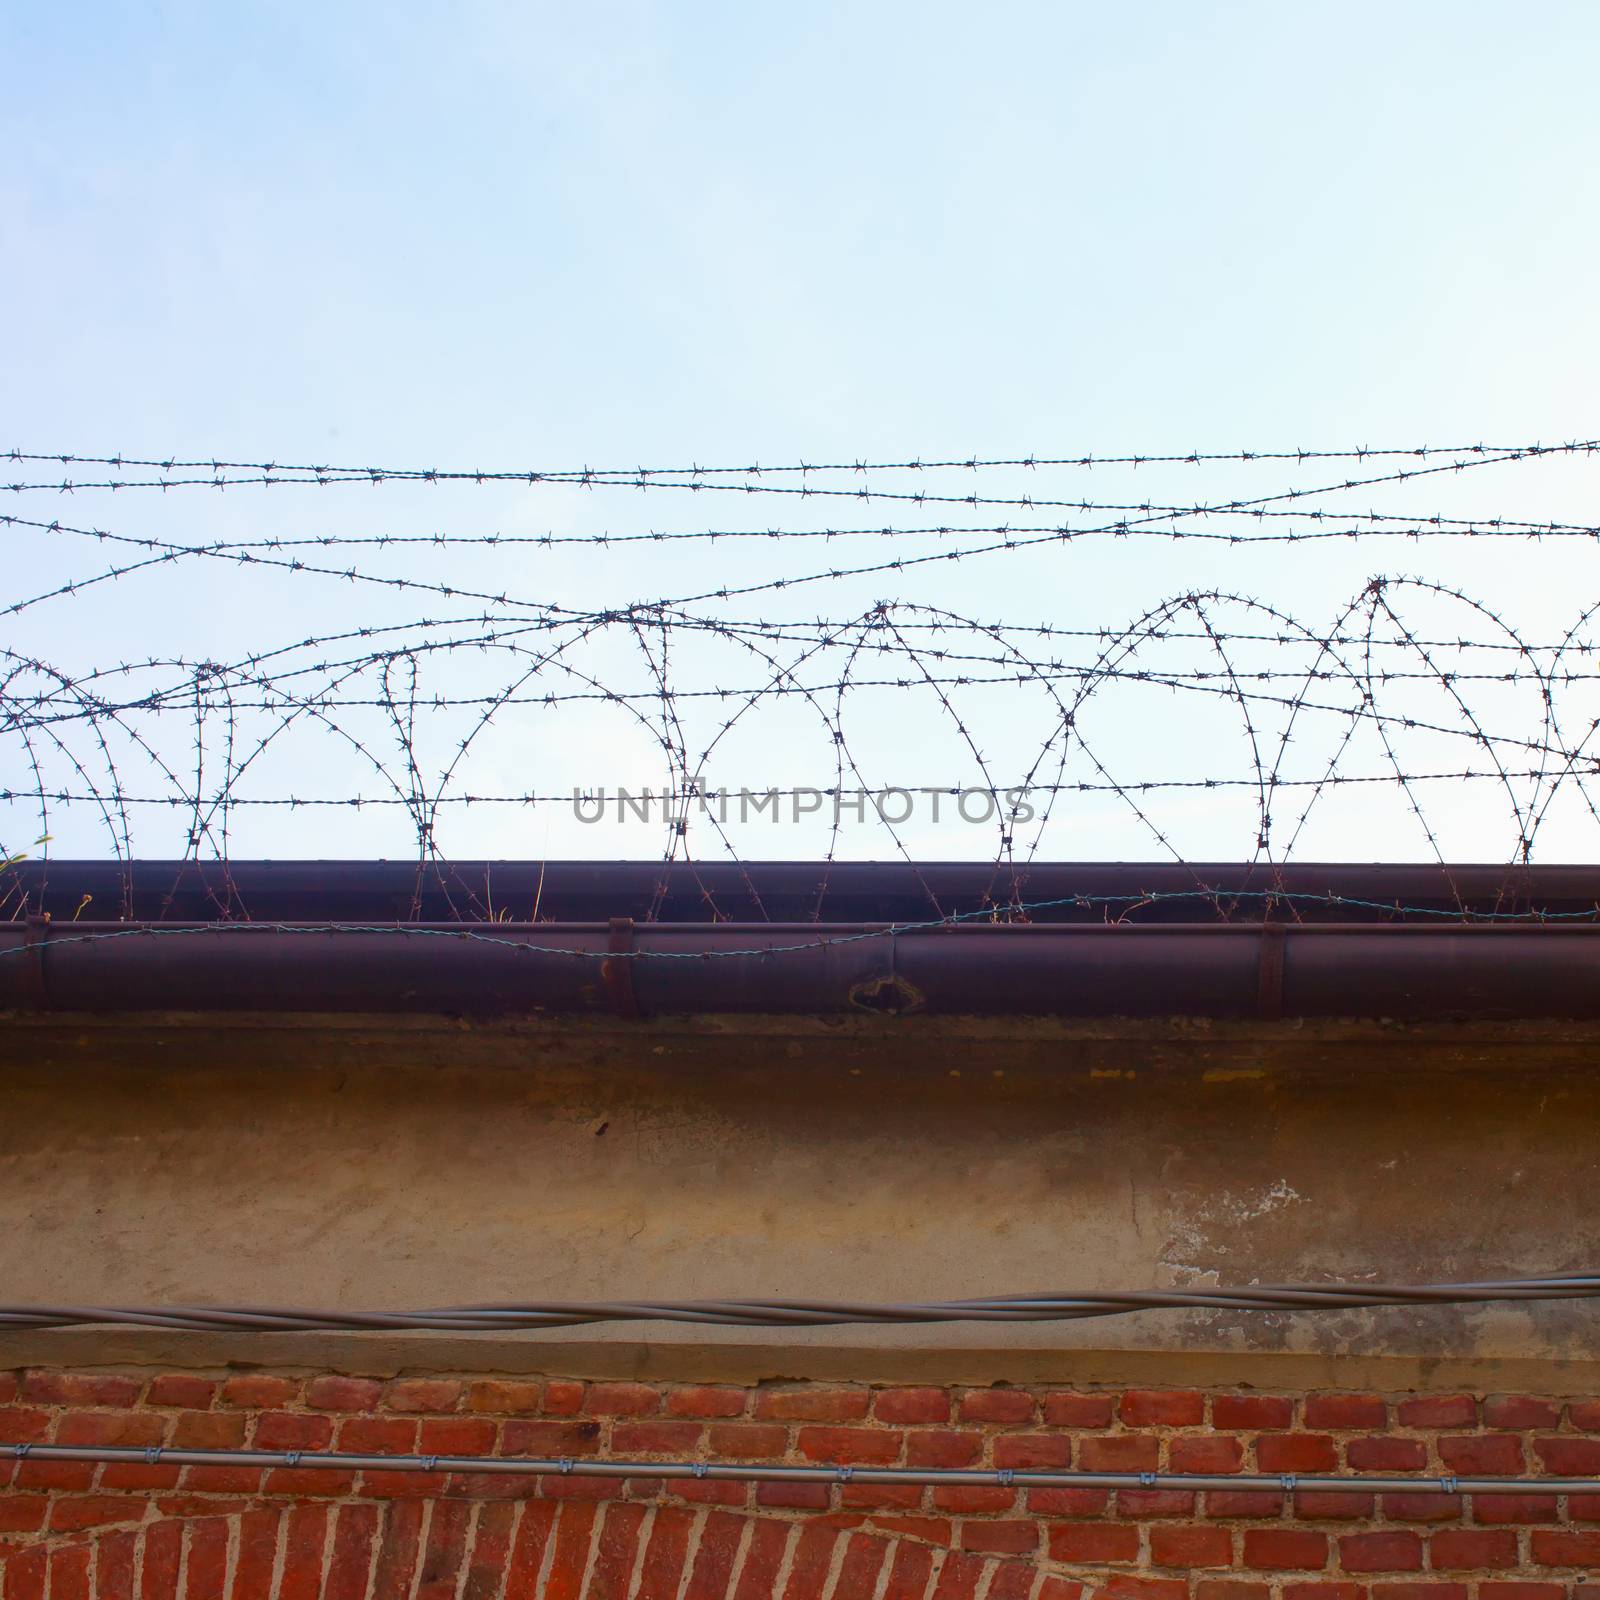 Barb wire on top of a wall, blue sky